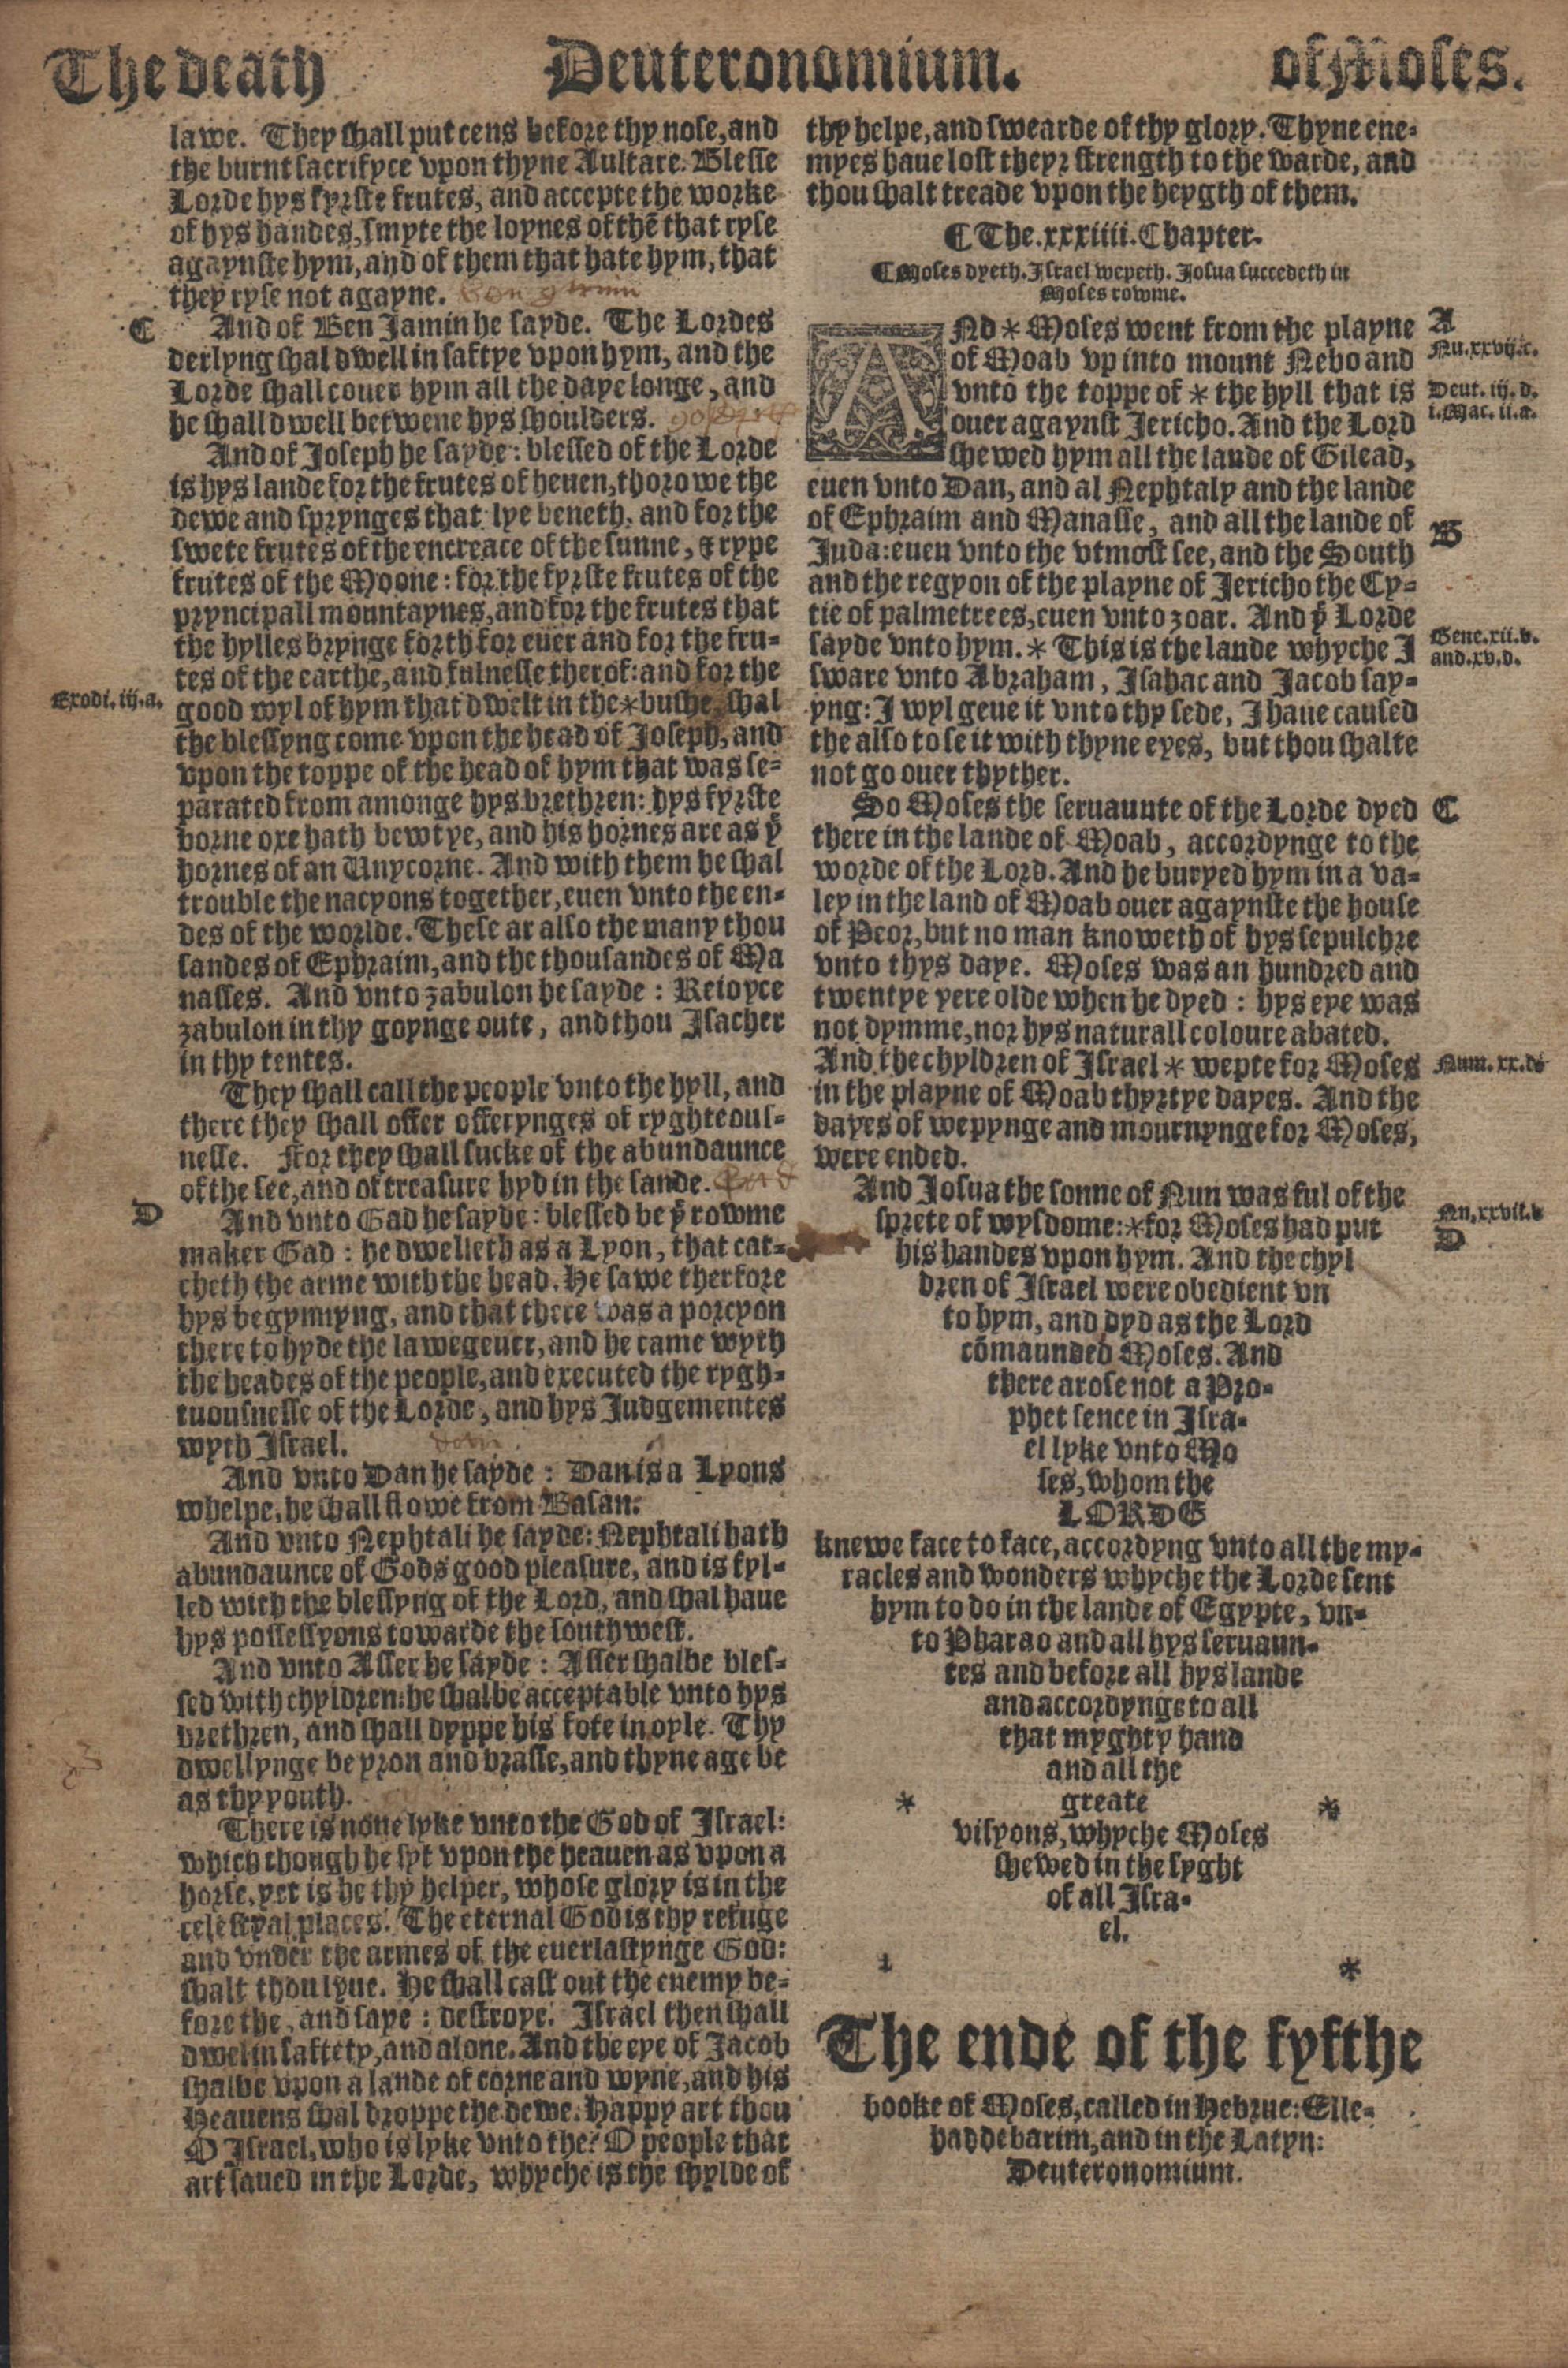 Deuteronomy, Complete Book from the 1540 